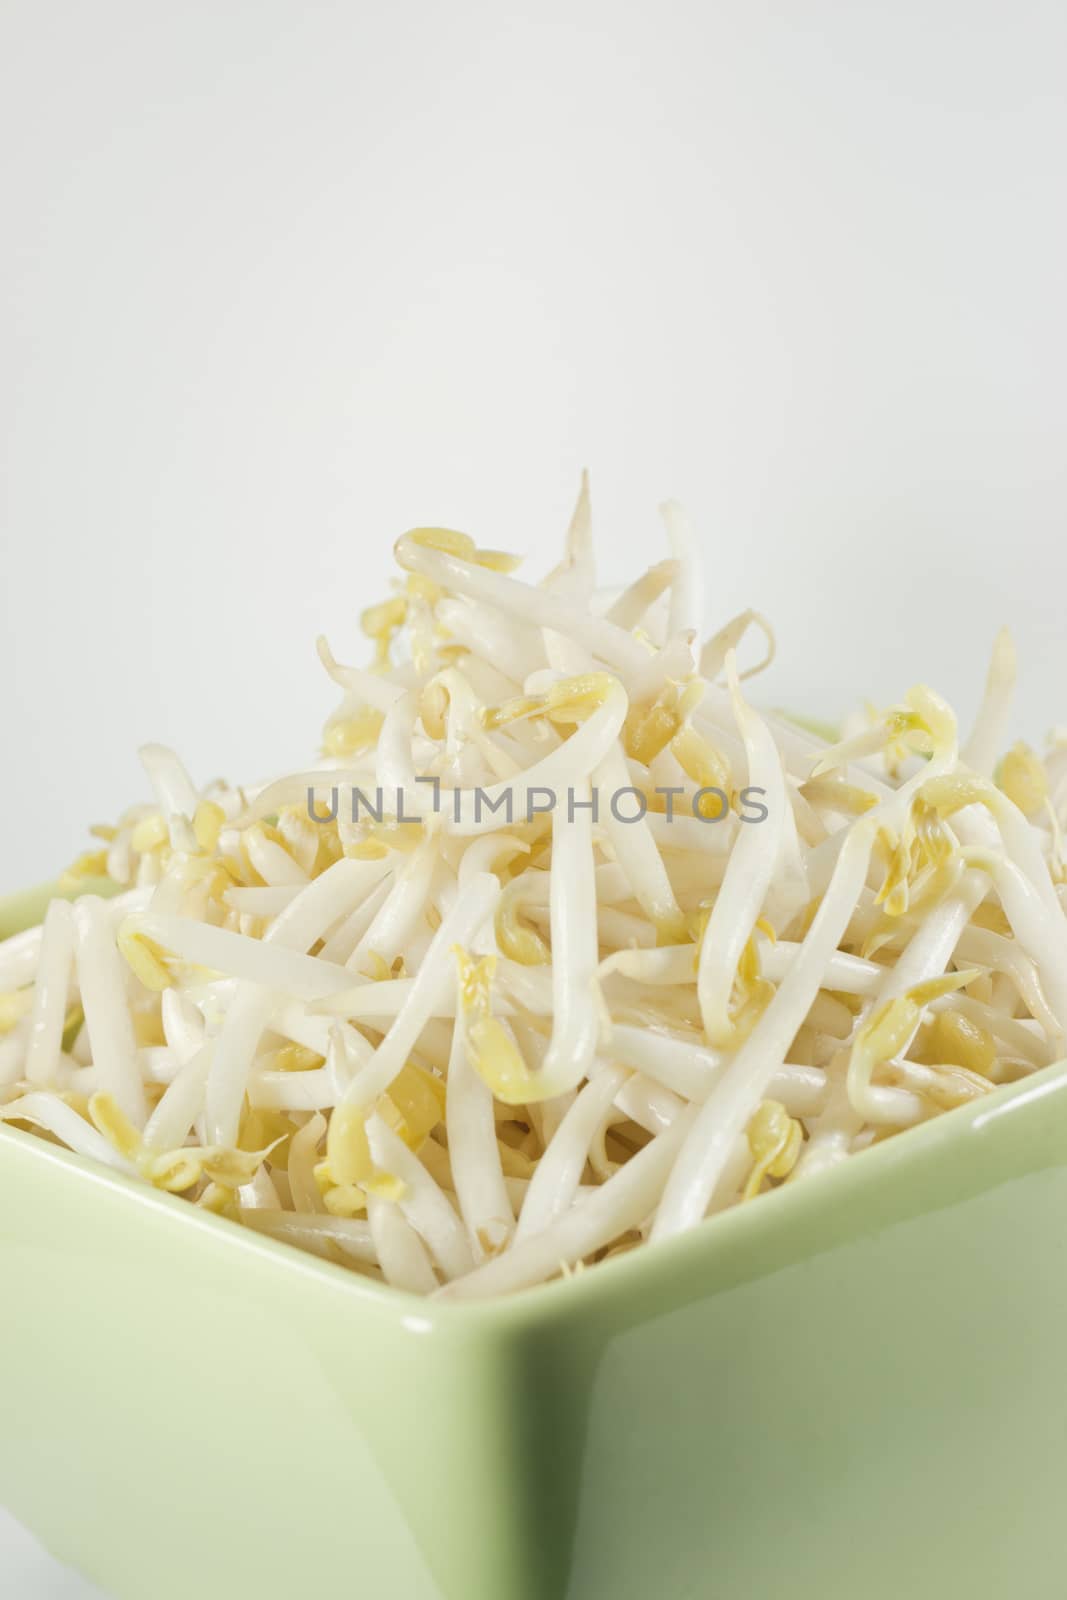 bean sprouts is main ingredient for menu noodle in thailand